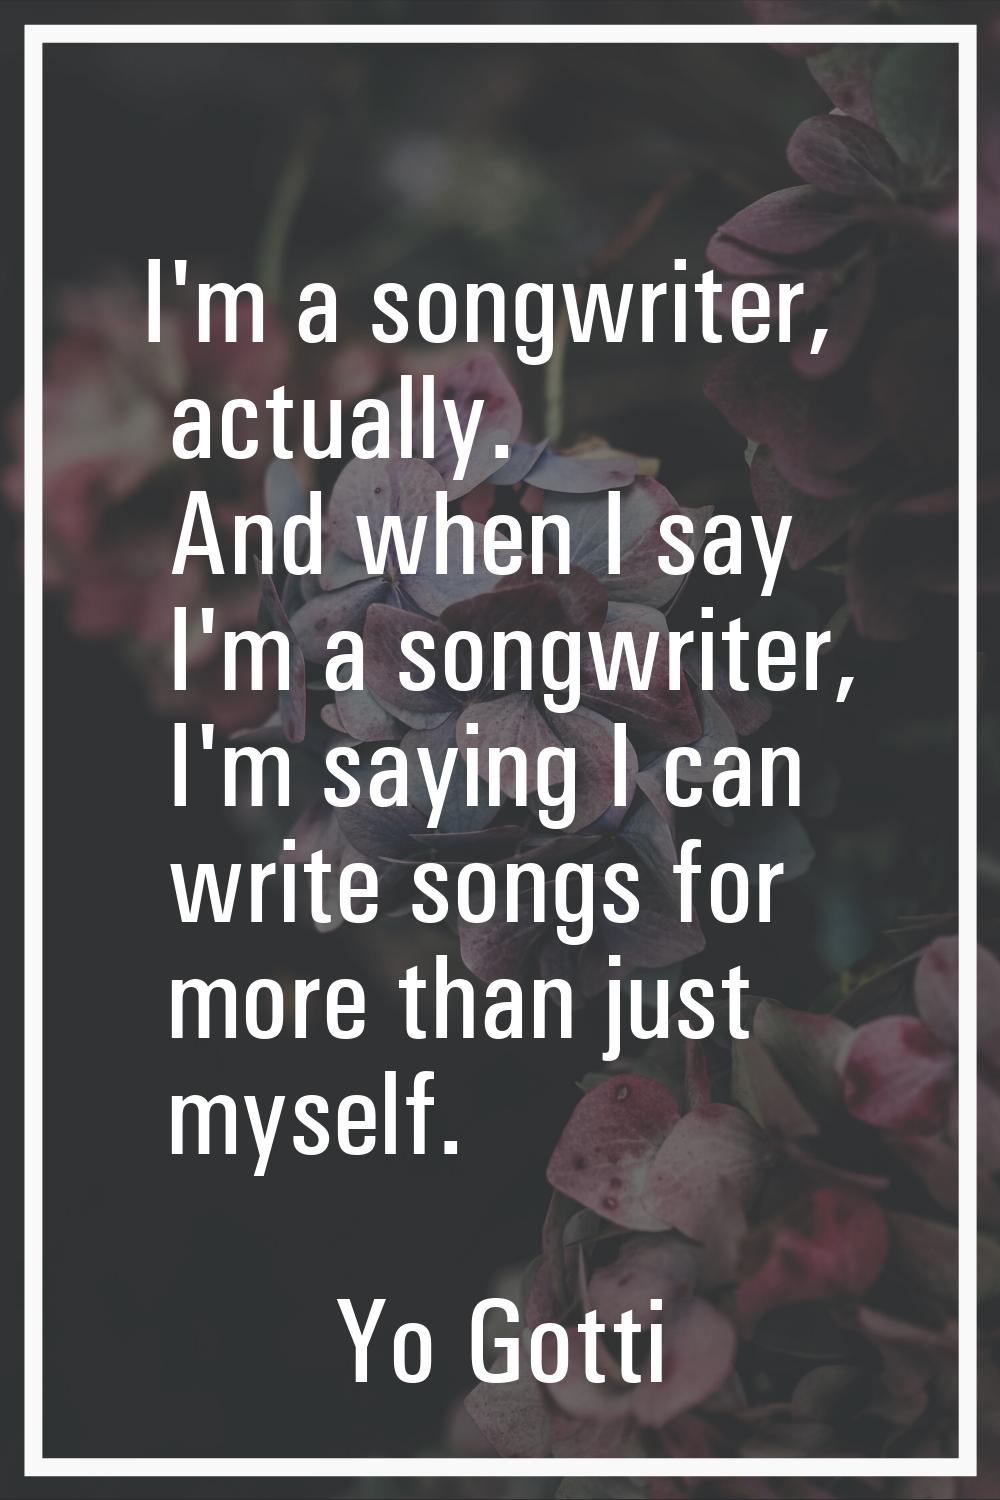 I'm a songwriter, actually. And when I say I'm a songwriter, I'm saying I can write songs for more 